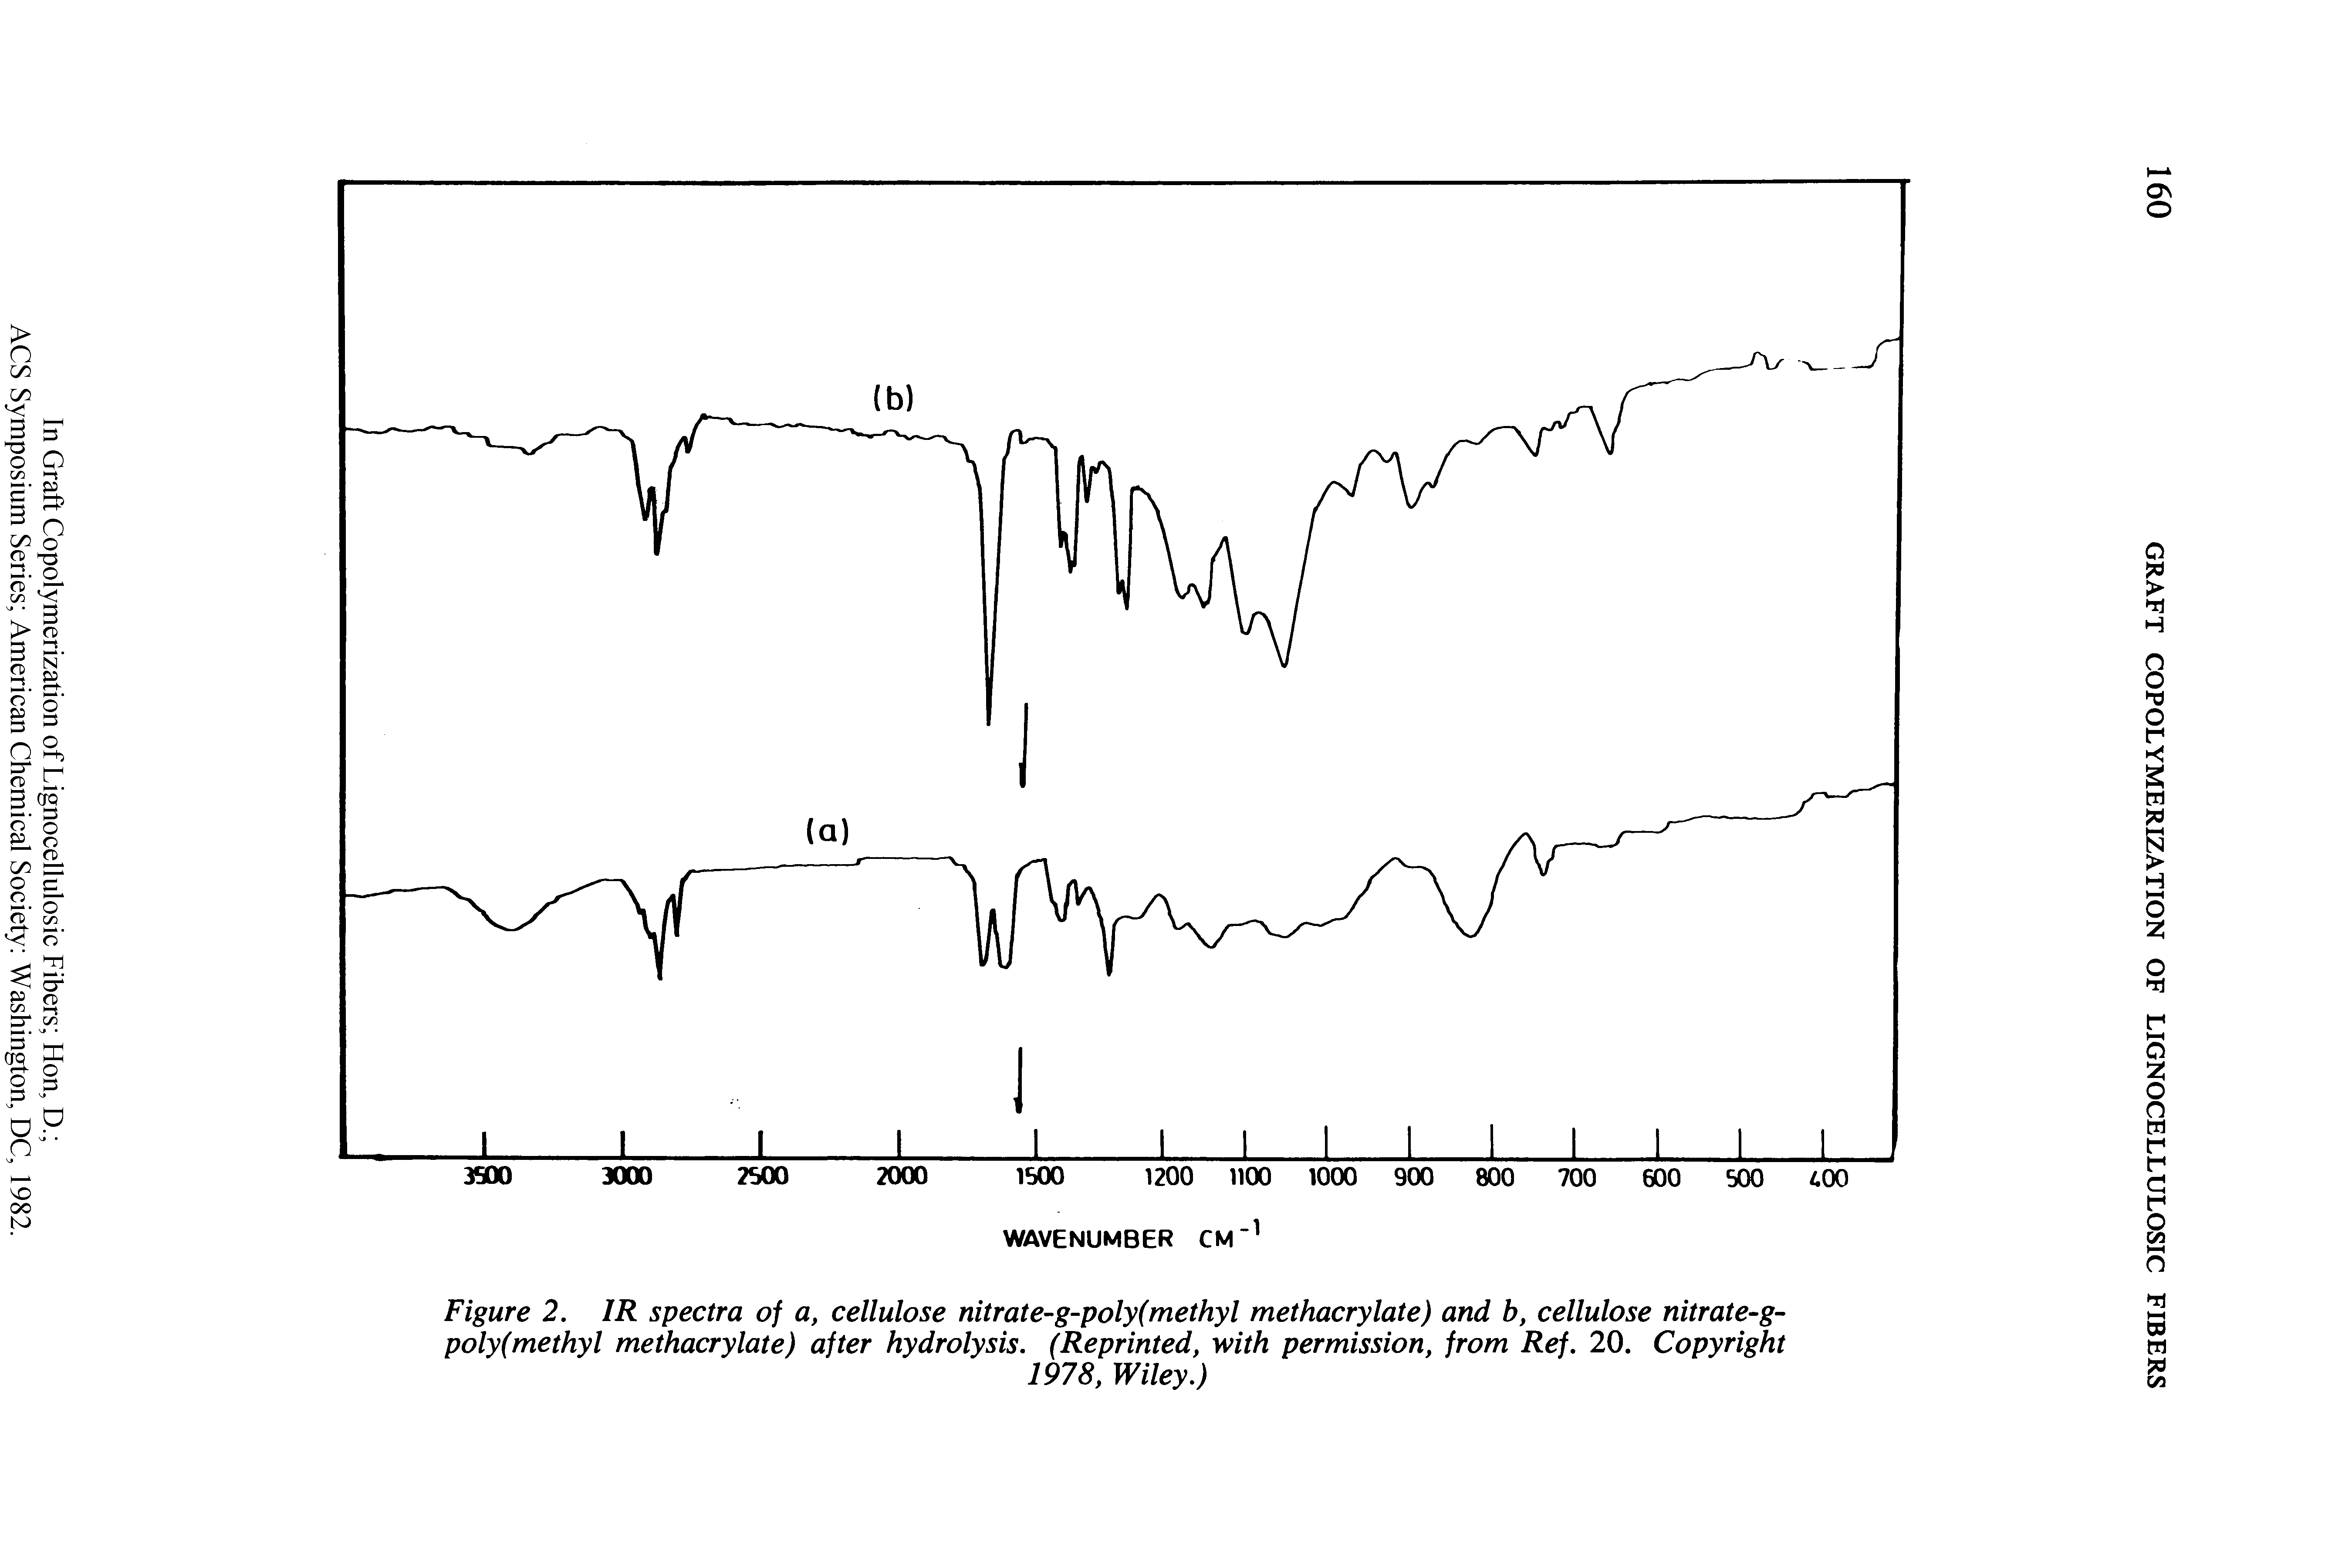 Figure 2. IR spectra of a, cellulose nitrate-g-poly(methyl methacrylate) and b, cellulose nitrate-g-poly(methyl methacrylate) after hydrolysis. (Reprinted, with permission, from Ref. 20. Copyright...